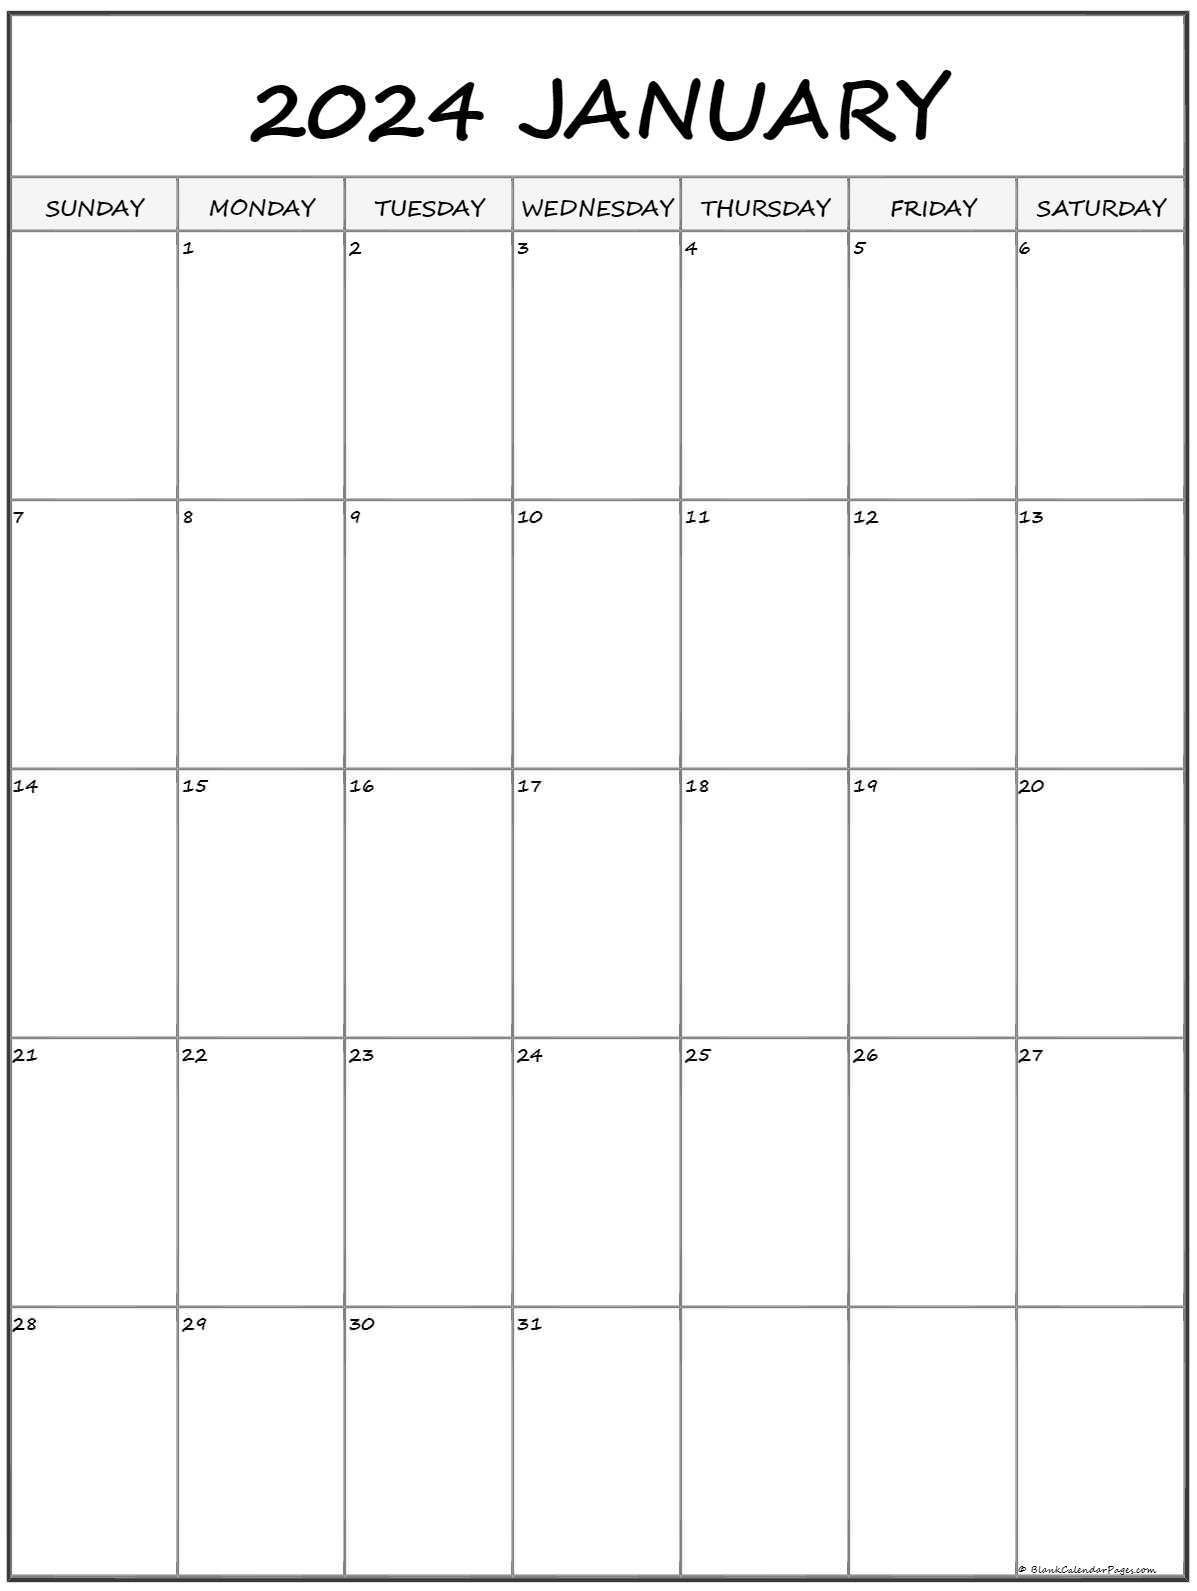 2024 Printable Calendar By Month Vertical And Mandy Rozelle - Free Printable 2024 Calender With Pigs